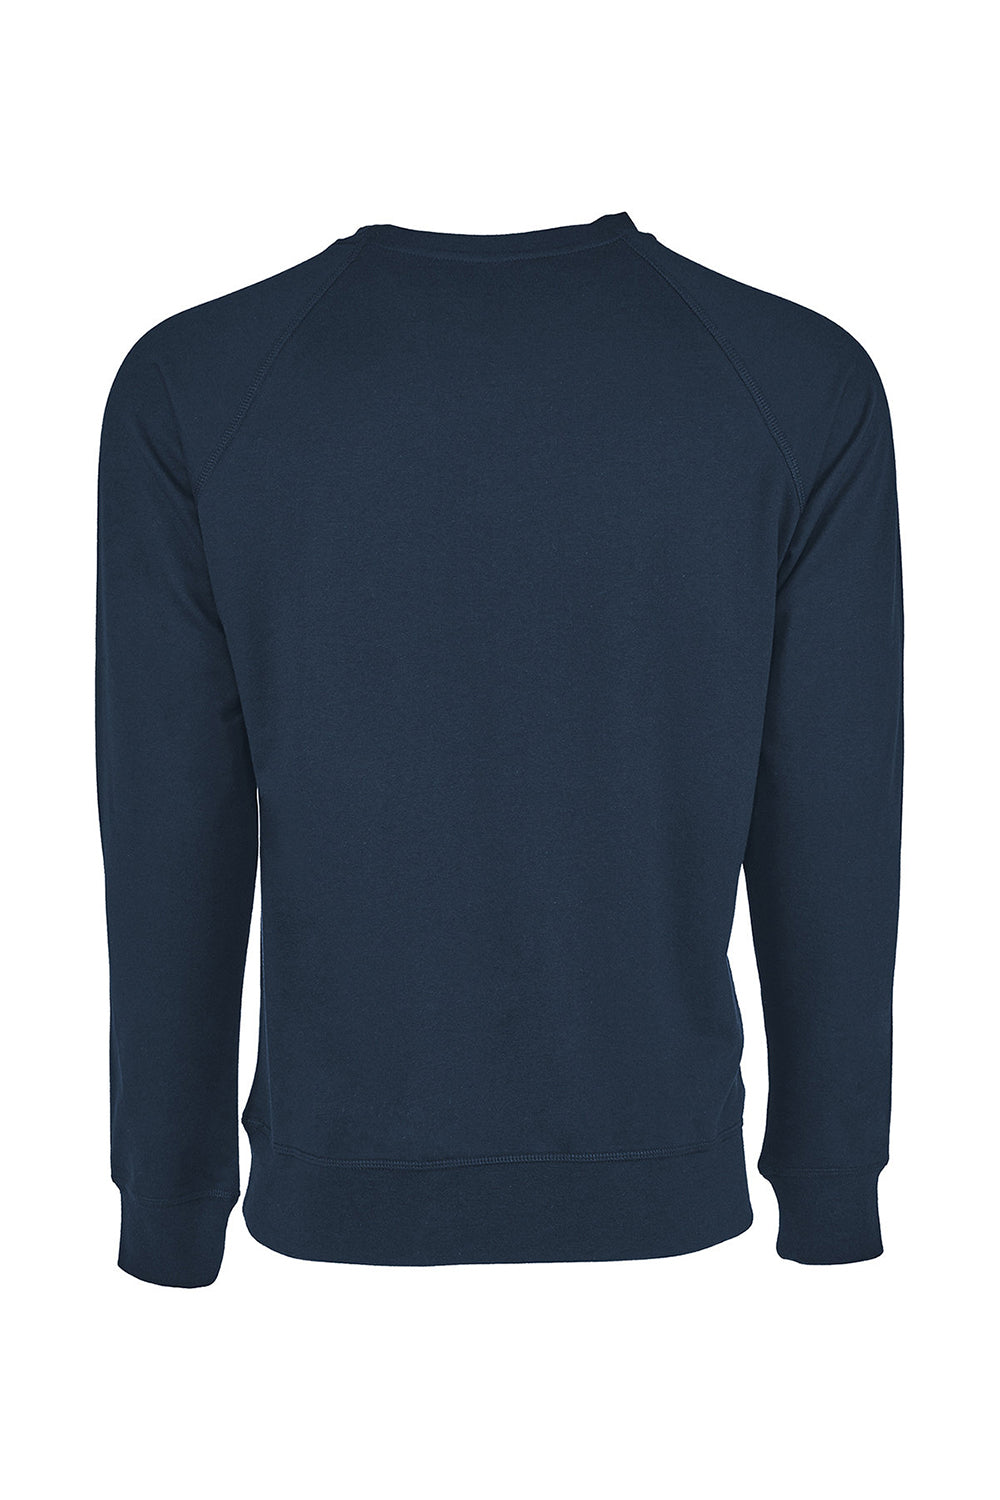 Next Level N9000/9000 Mens French Terry Long Sleeve Crewneck T-Shirt Cool Blue Flat Back